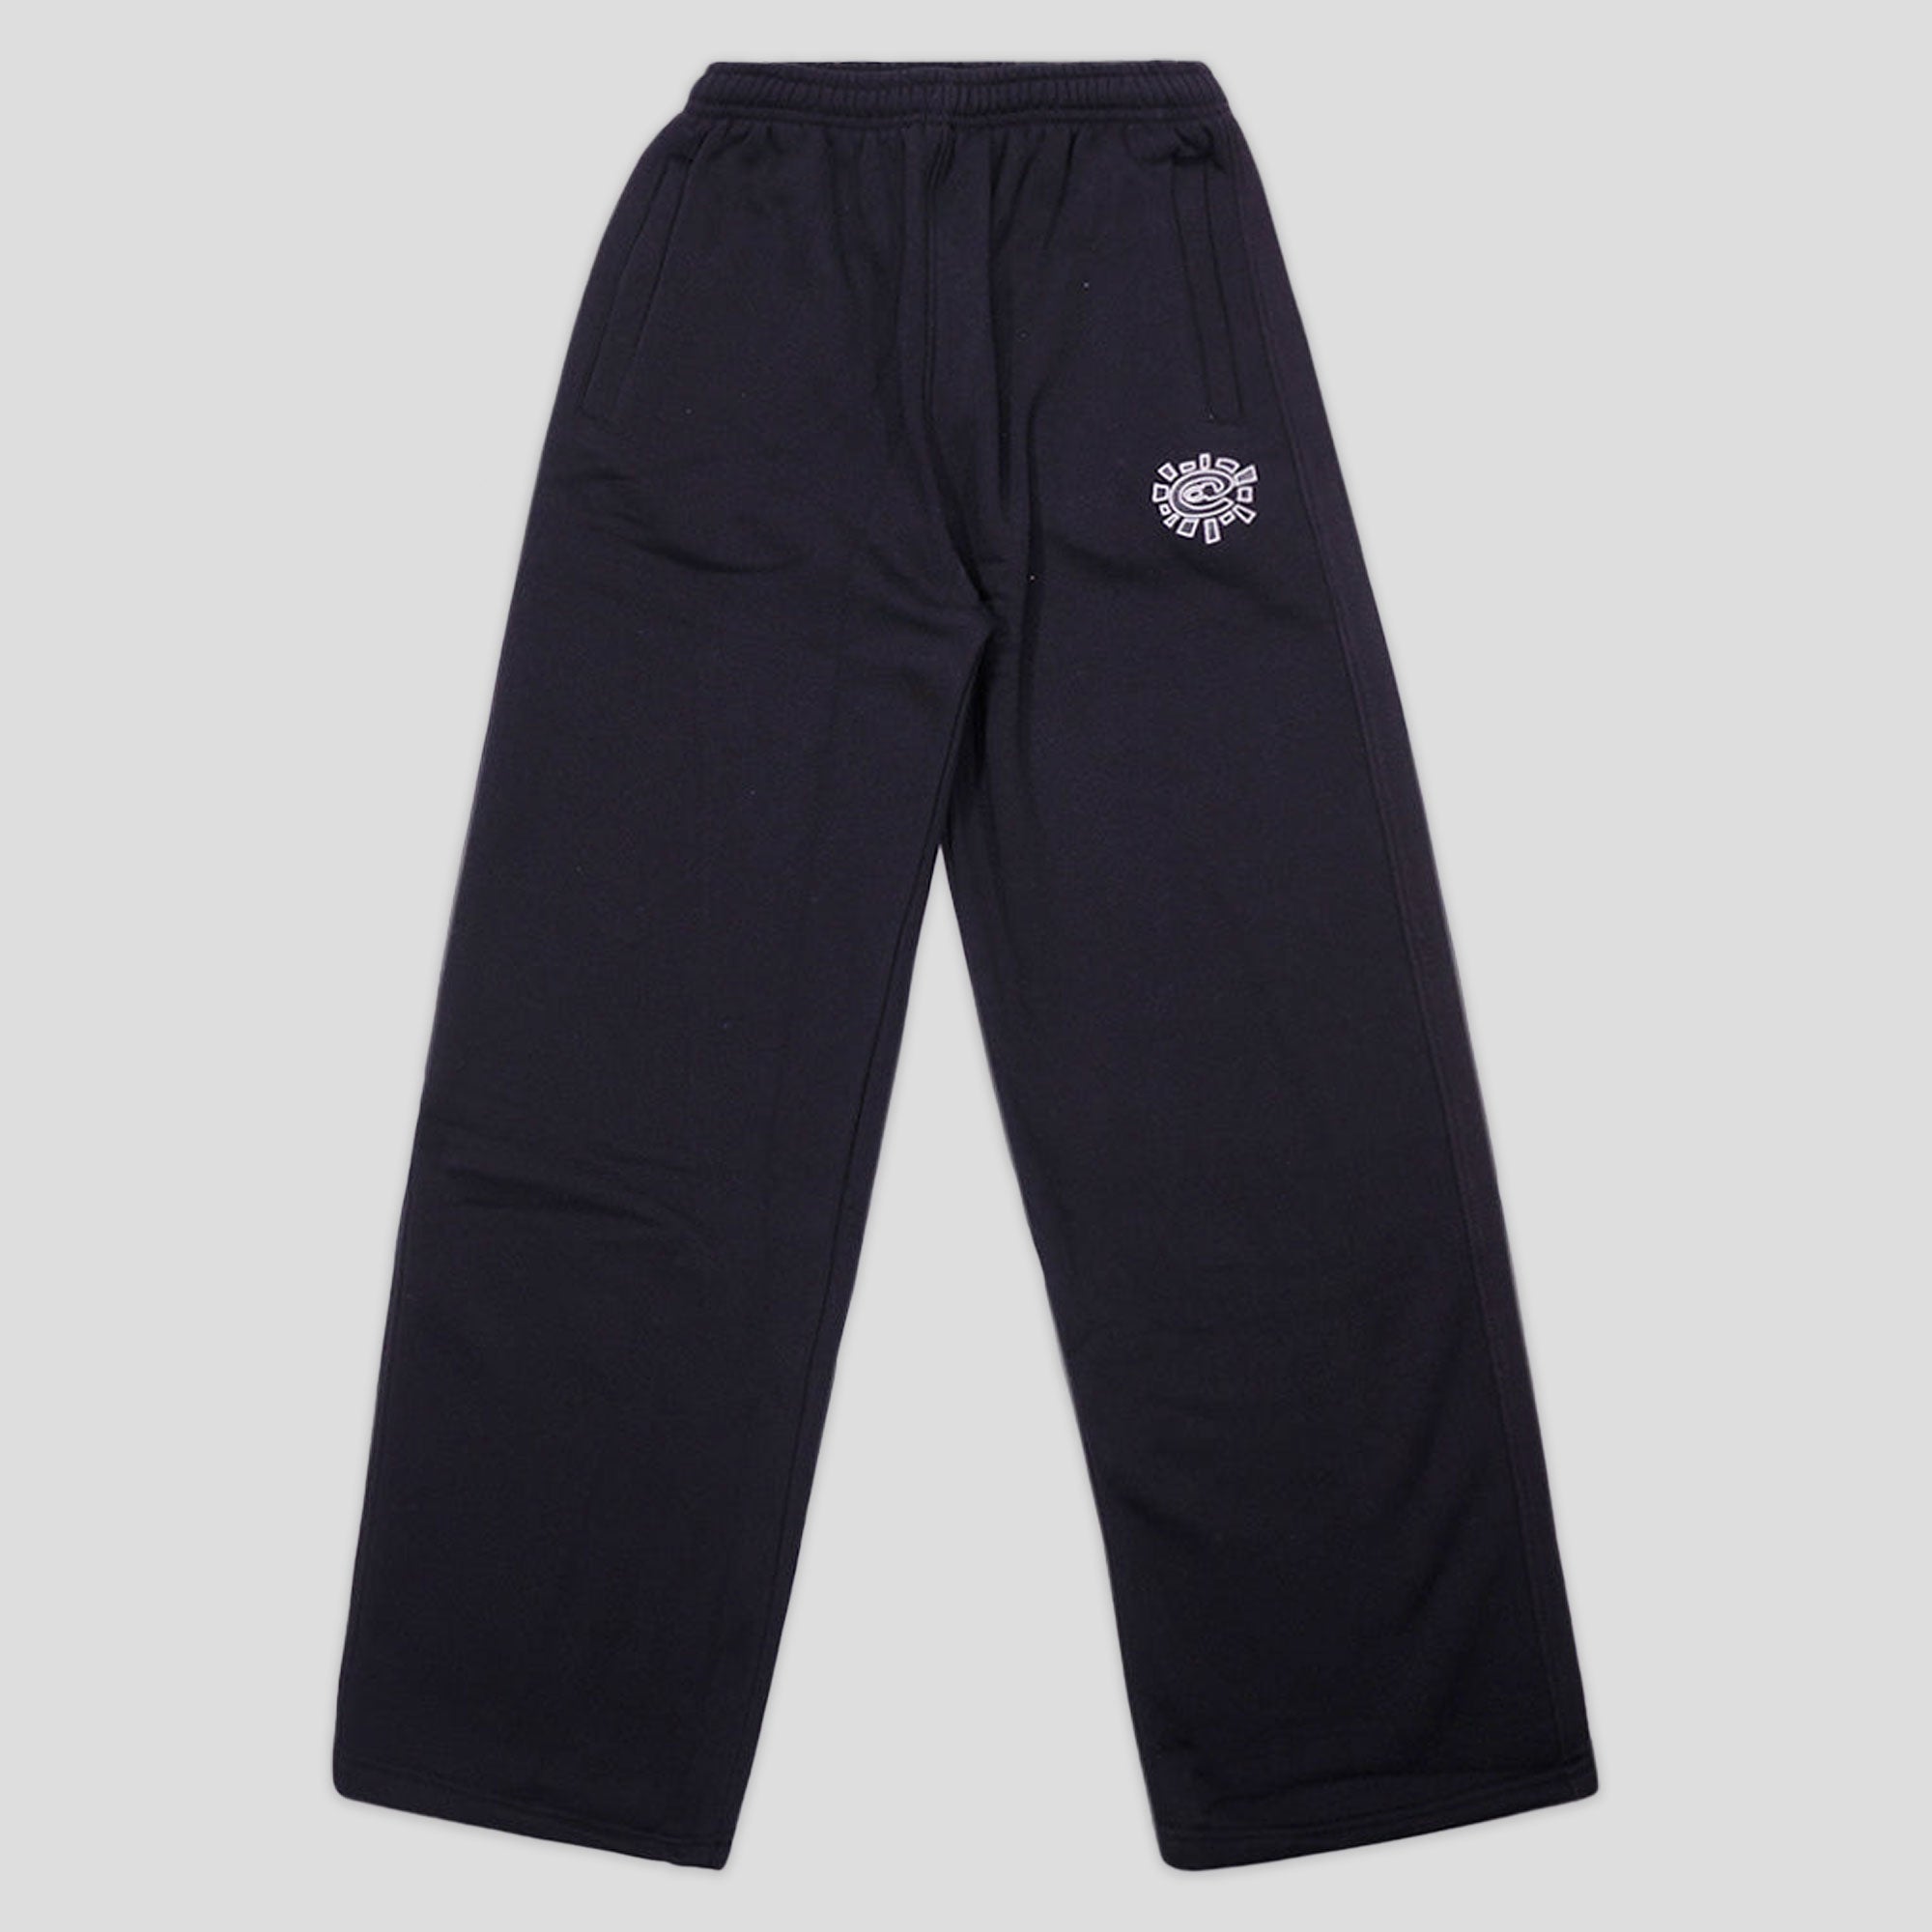 Always Do What You Should Do No Cuff Joggers - Black